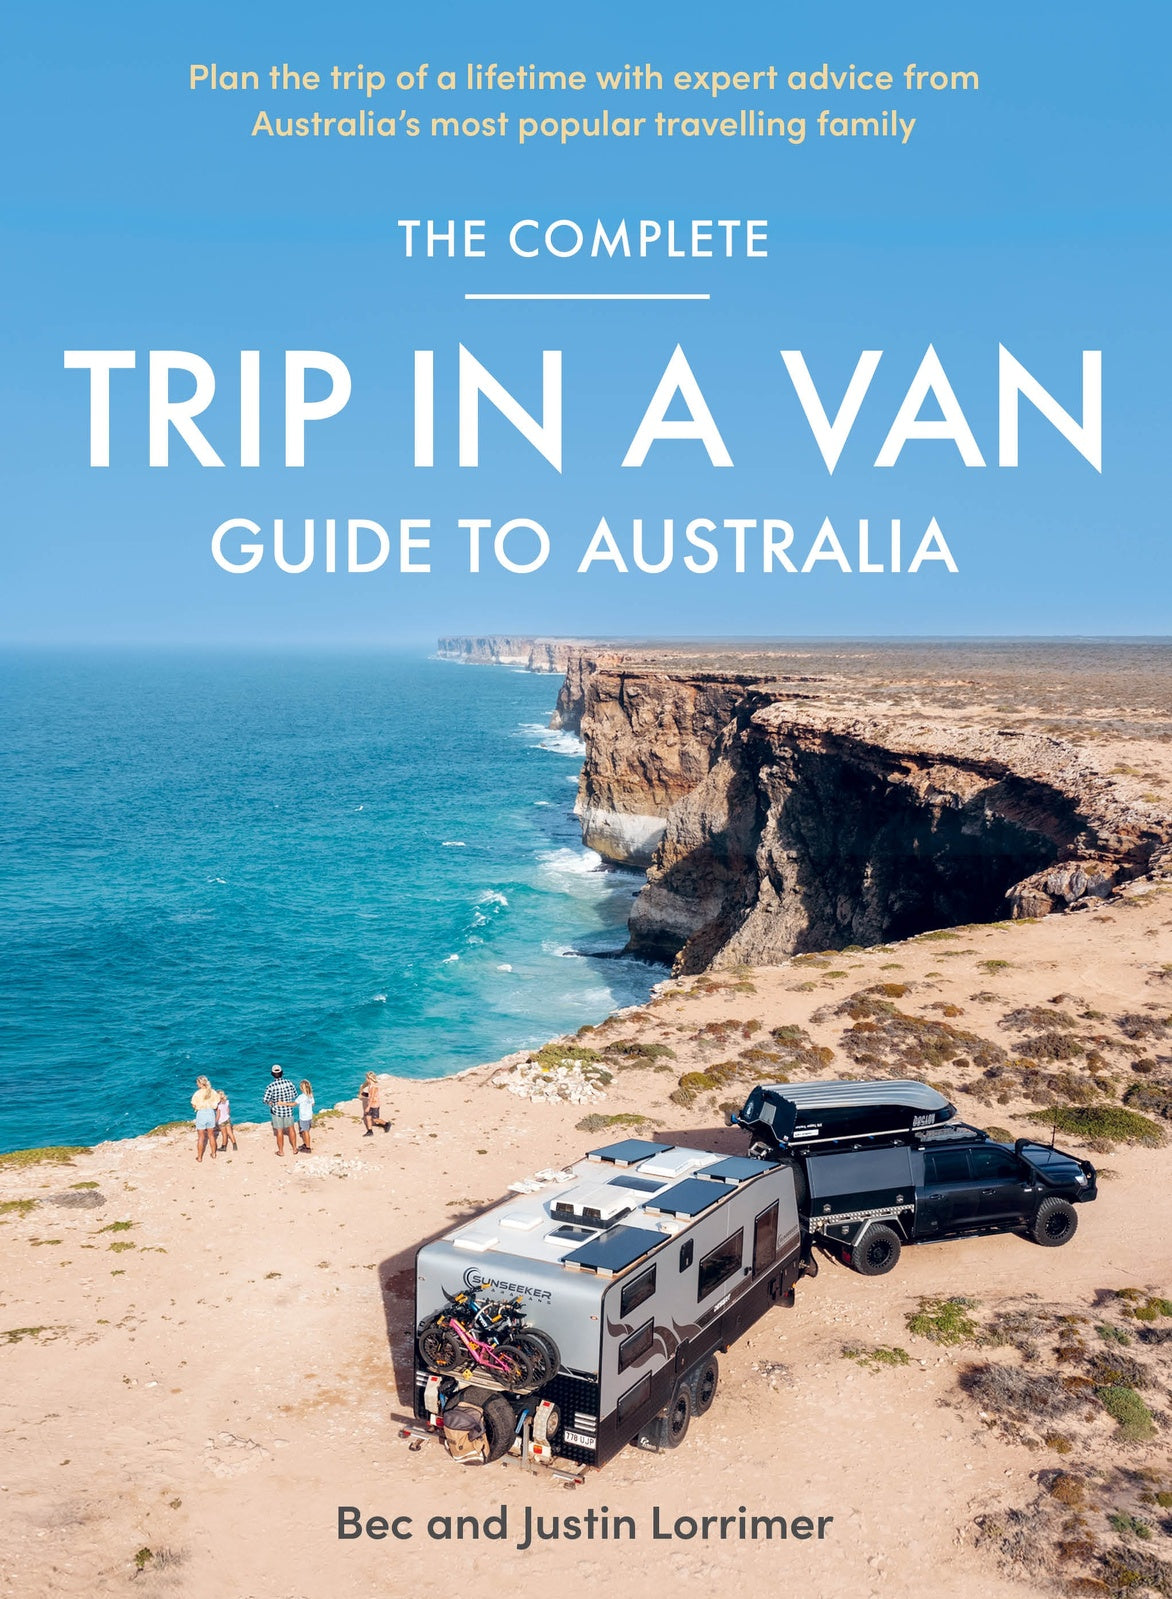 The Complete Trip in a Van Guide to Australia by Bec and Justin Lorrimer